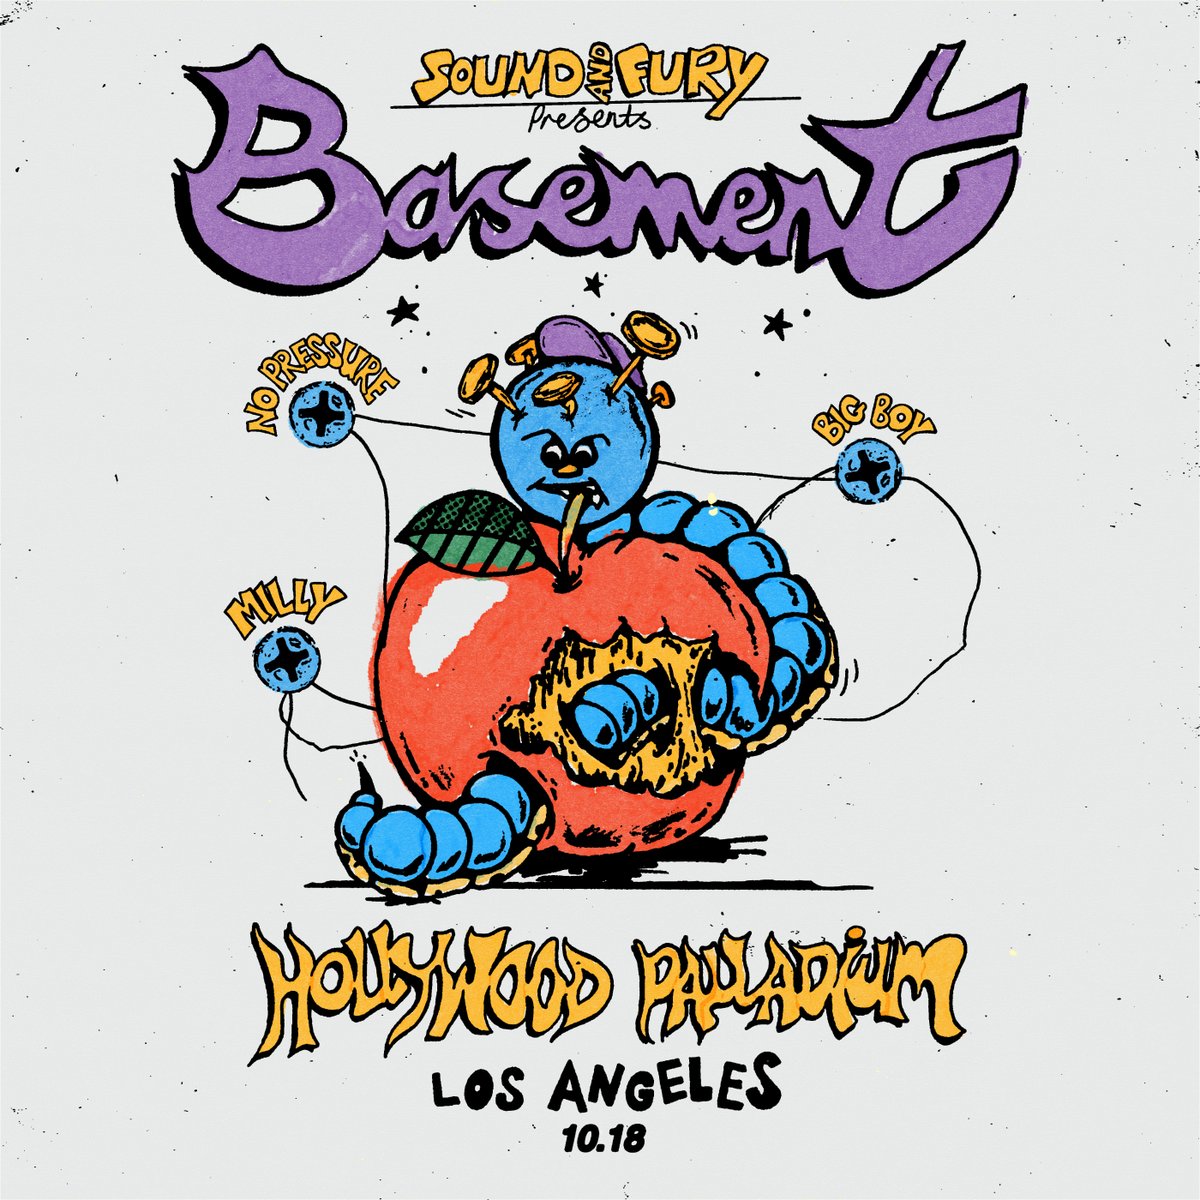 We're excited to announce that our friends in Basement will be taking to the stage at @thepalladium with No Pressure, Big Boy, and Milly on Oct. 18th! Tickets on sale Friday. tix: allages.com